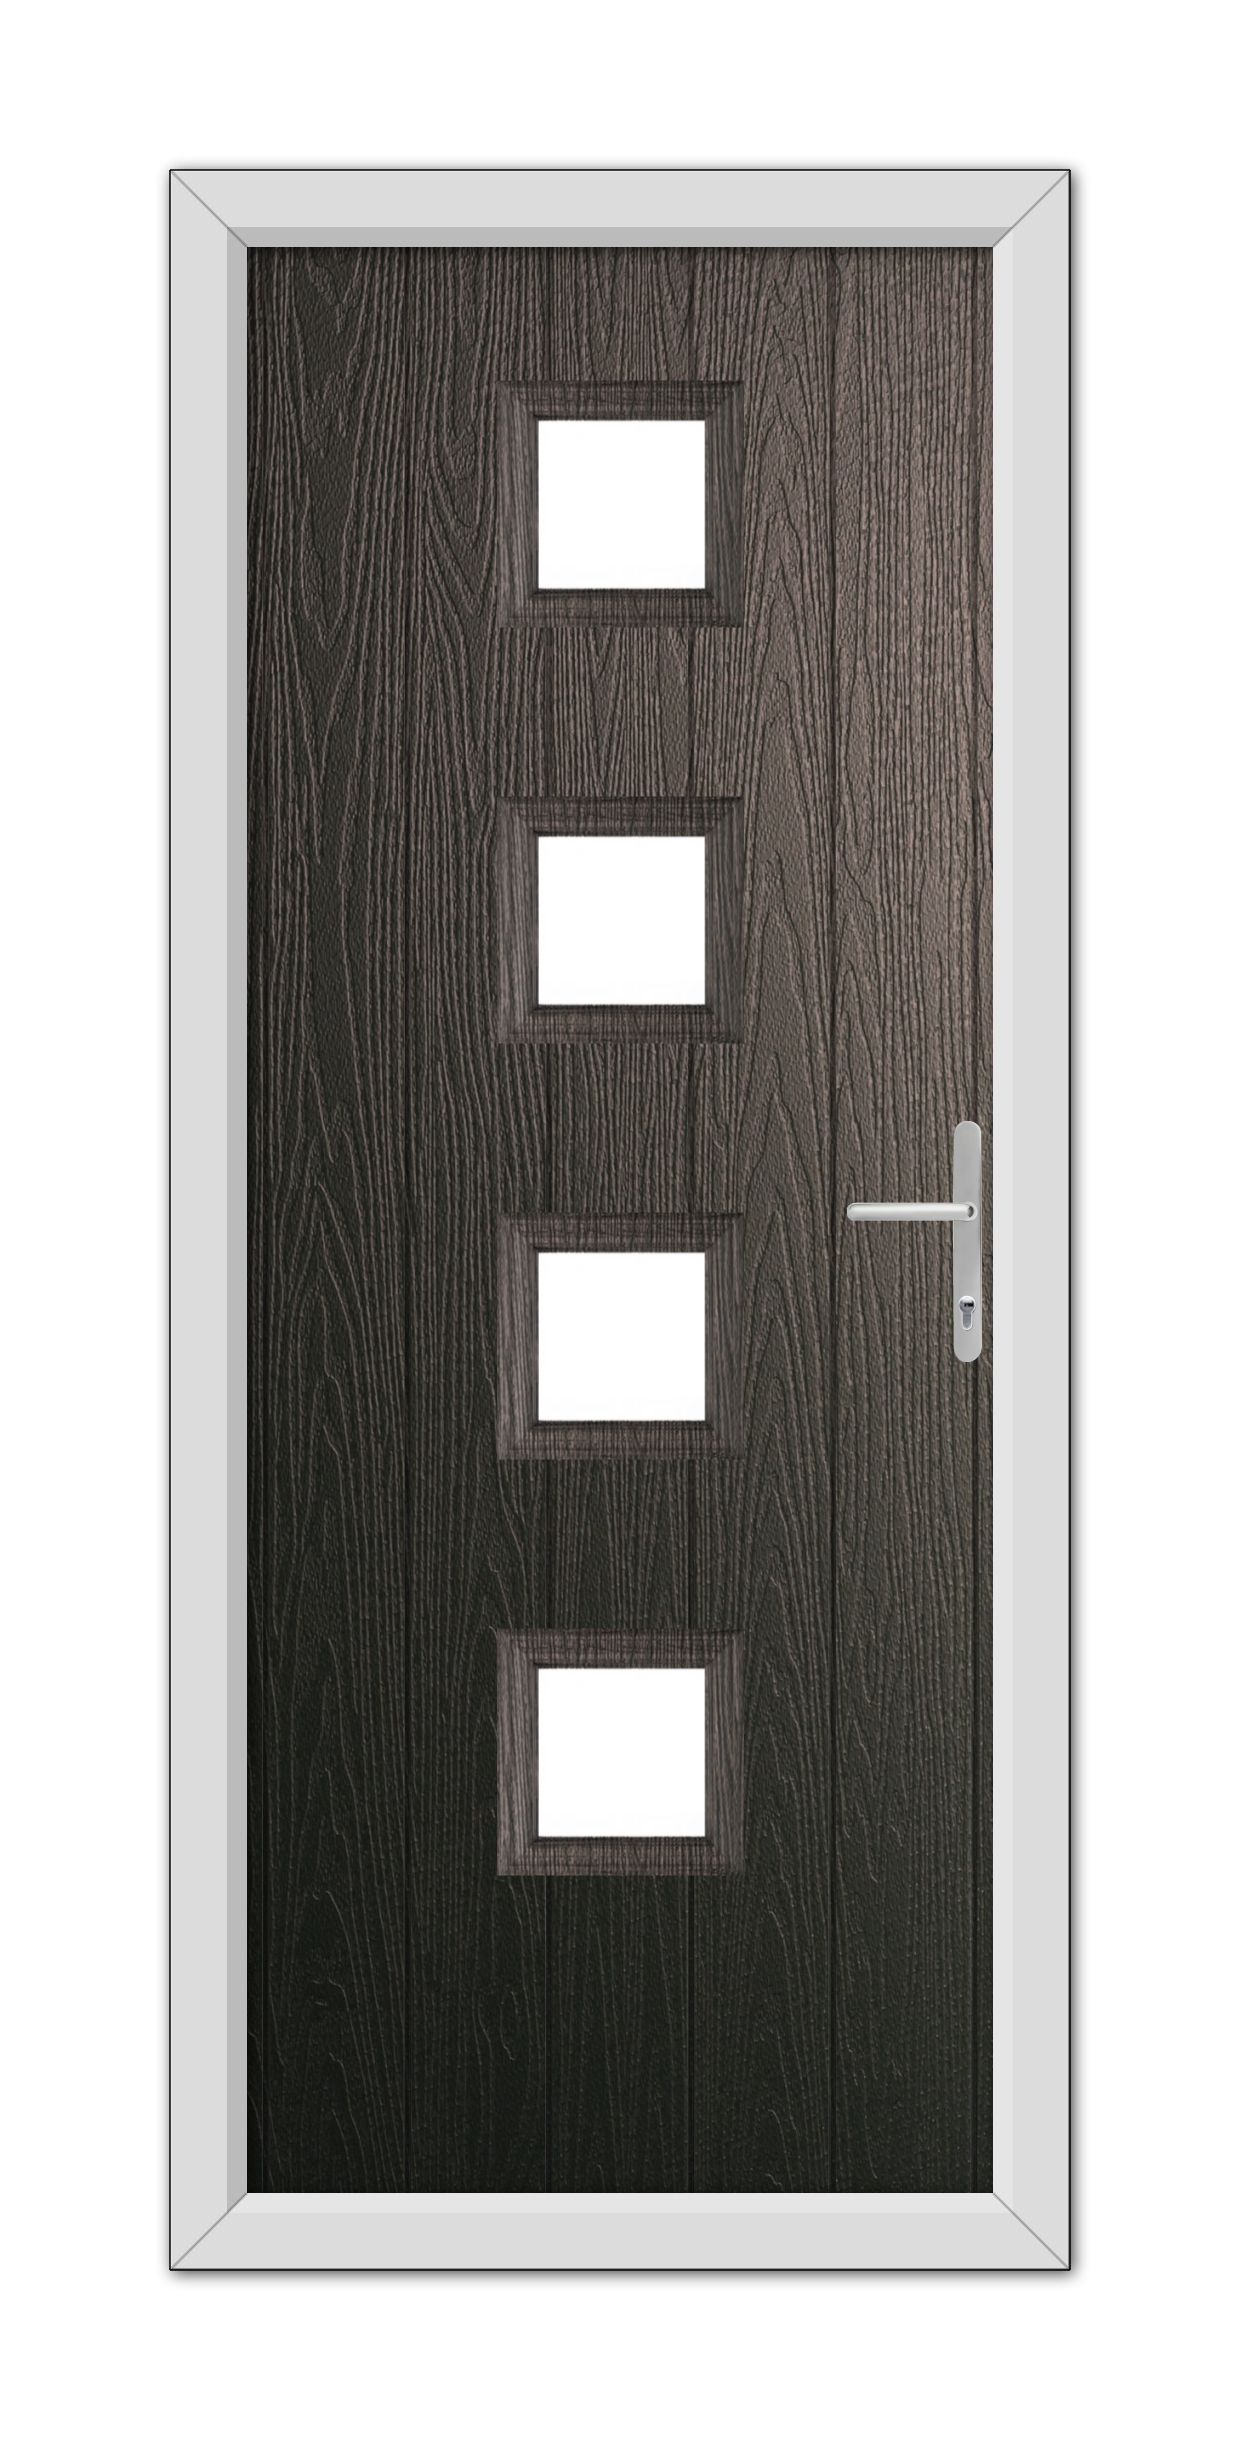 A modern Schwarzbraun Hamilton Composite Door 48mm Timber Core with four rectangular glass panels and a metallic handle, isolated on a white background.